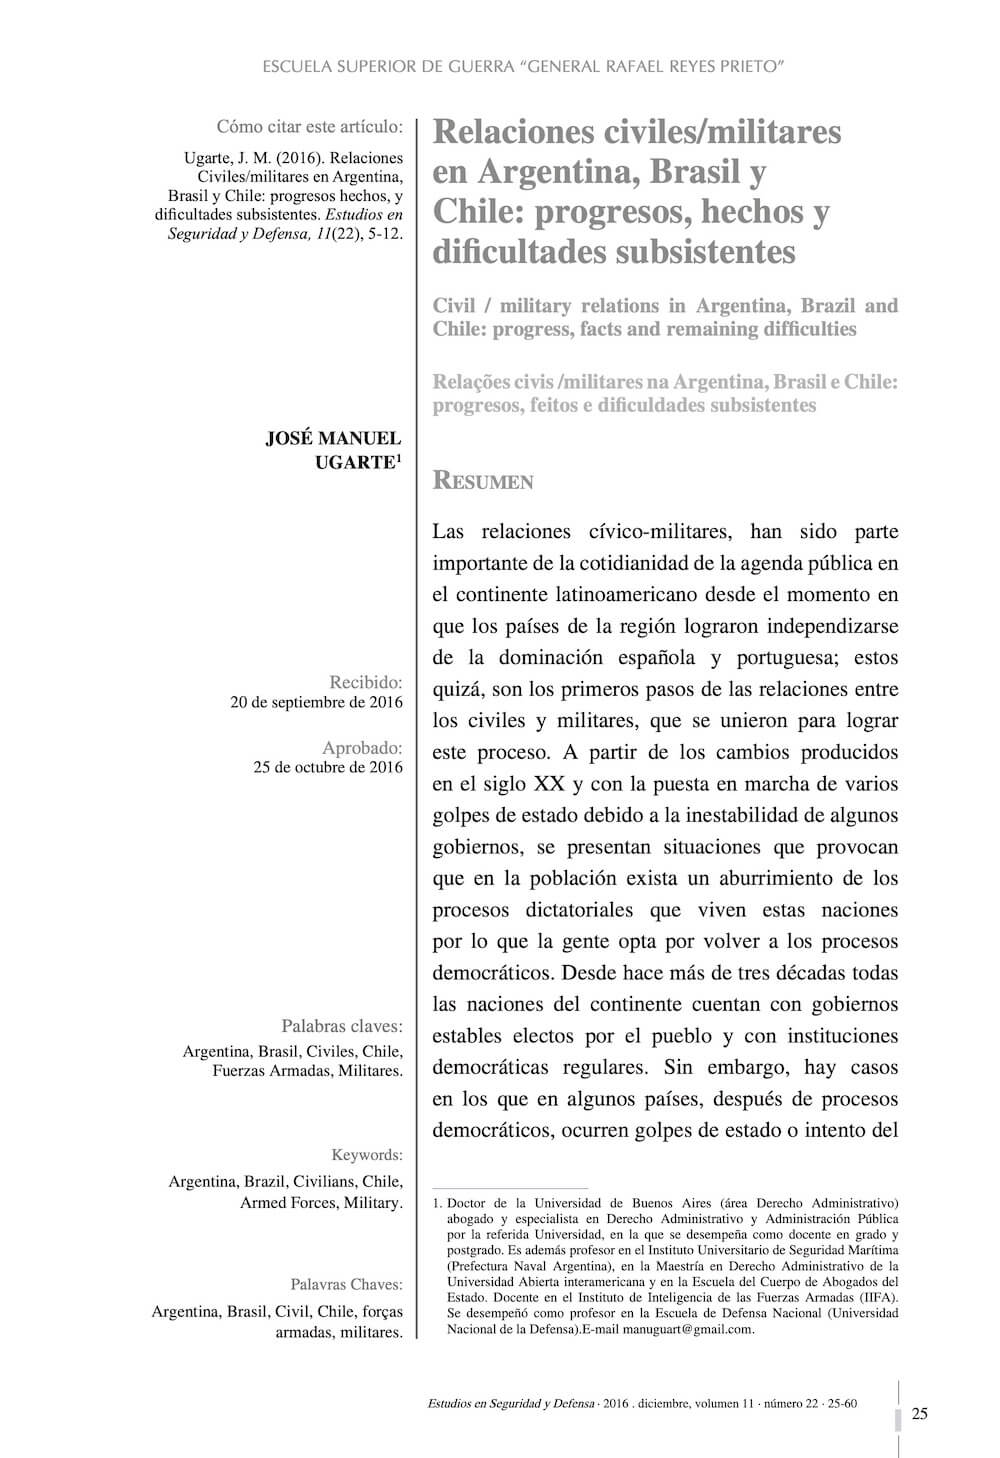 The first page of a scientific article in Spanish before translation